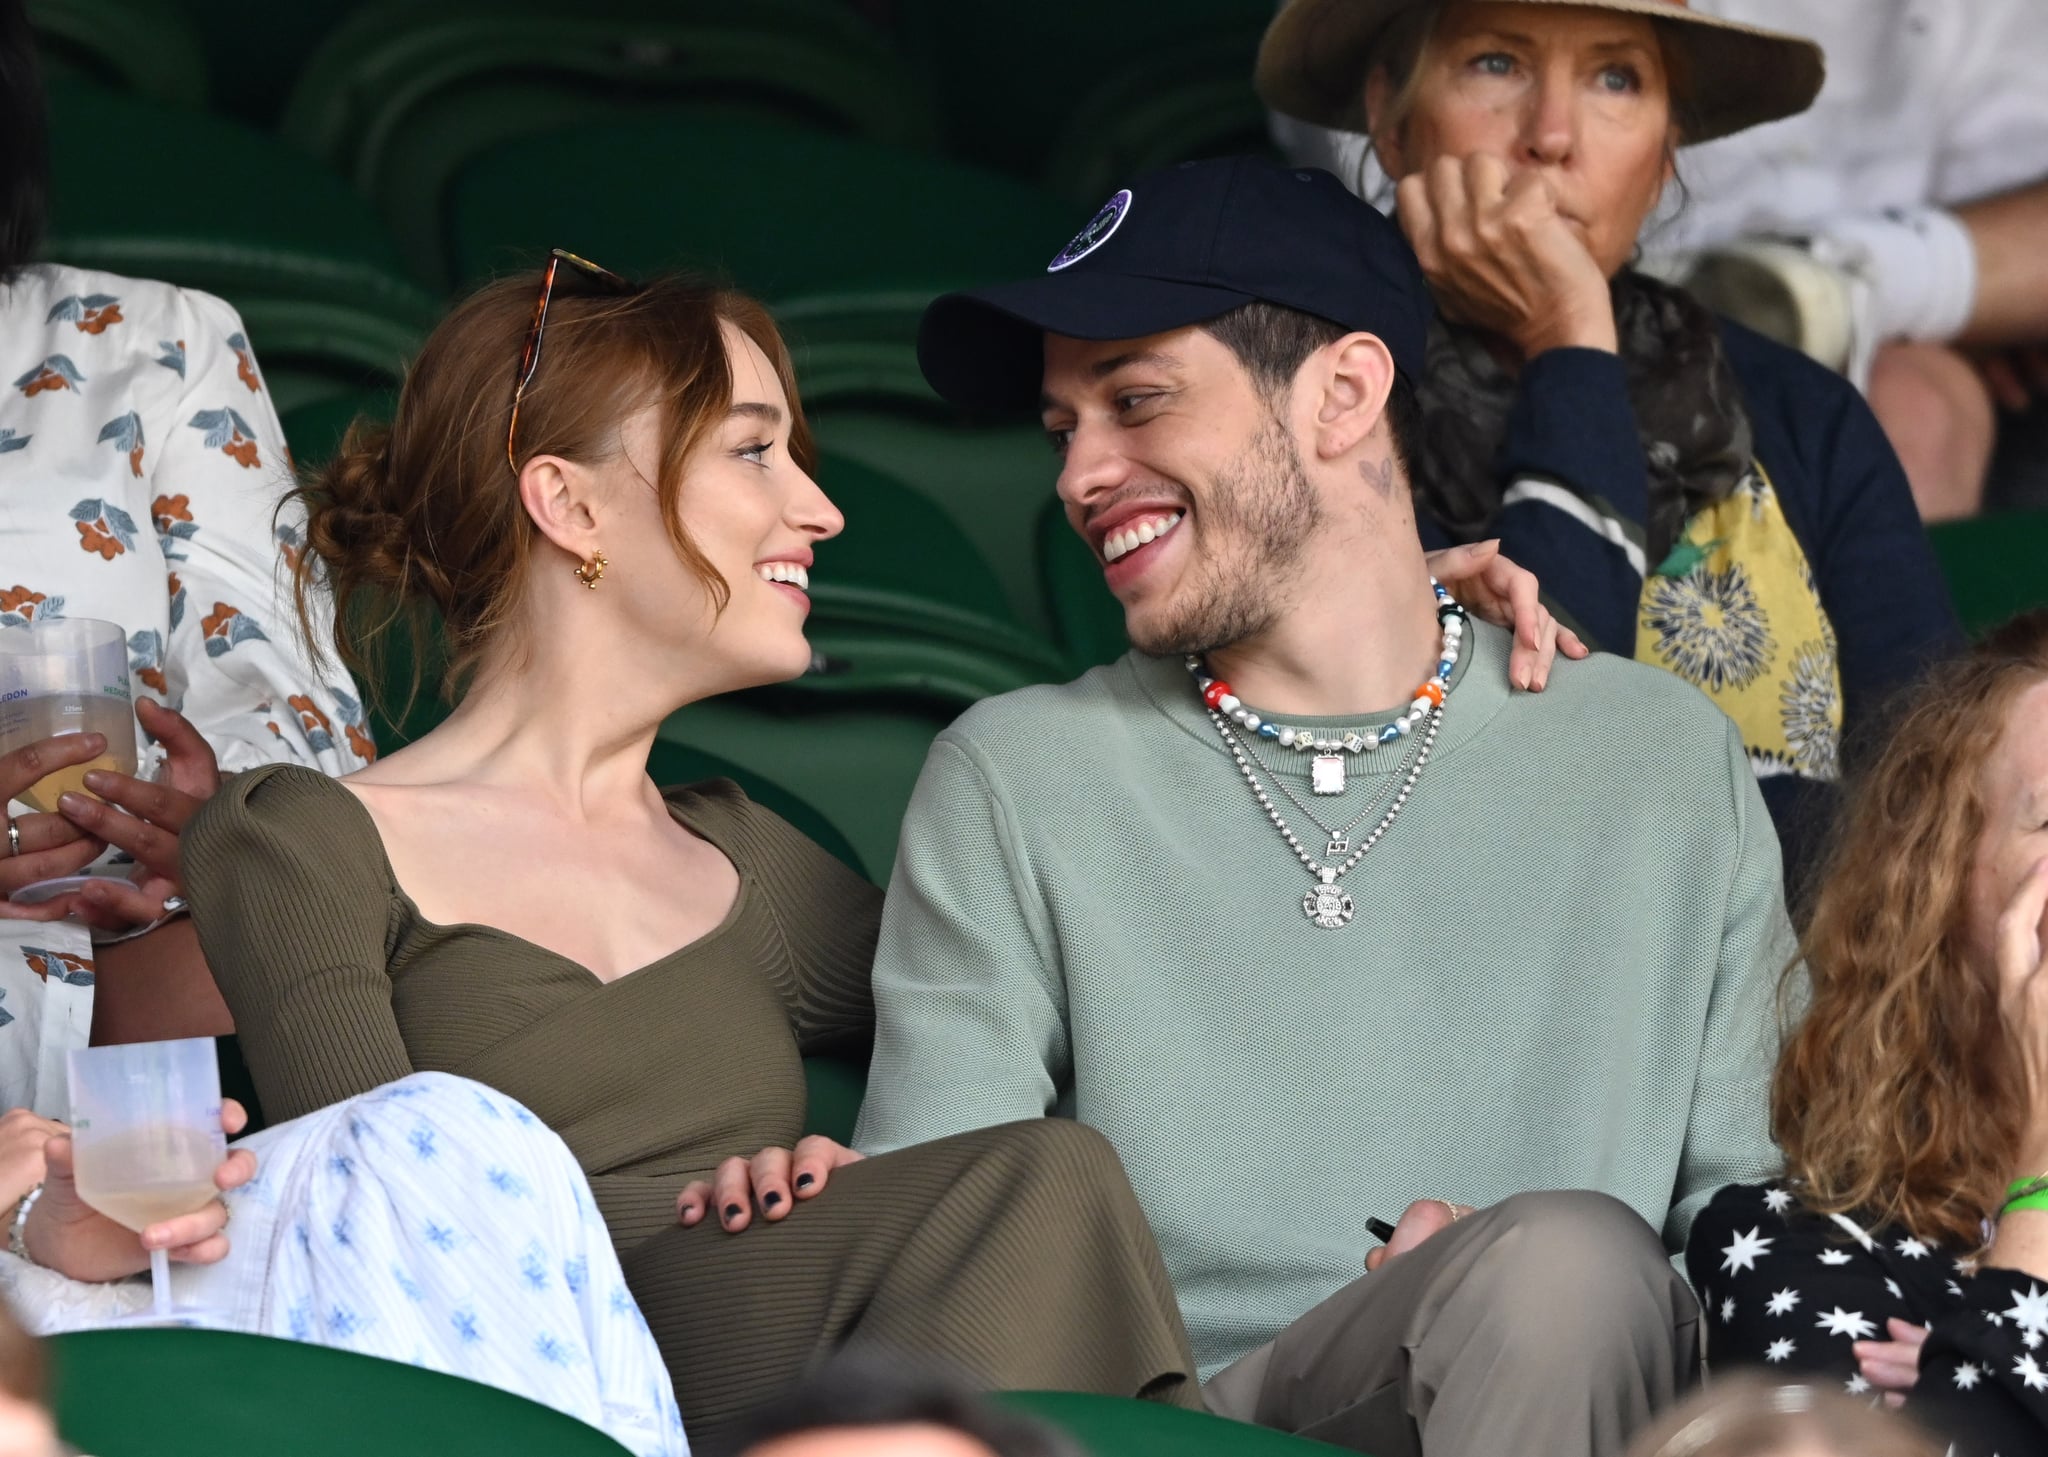 LONDON, ENGLAND - JULY 03: Phoebe Dynevor and Pete Davidson hosted by Lanson attend day 6 of the Wimbledon Tennis Championships at the All England Lawn Tennis and Croquet Club on July 03, 2021 in London, England. (Photo by Karwai Tang/WireImage)